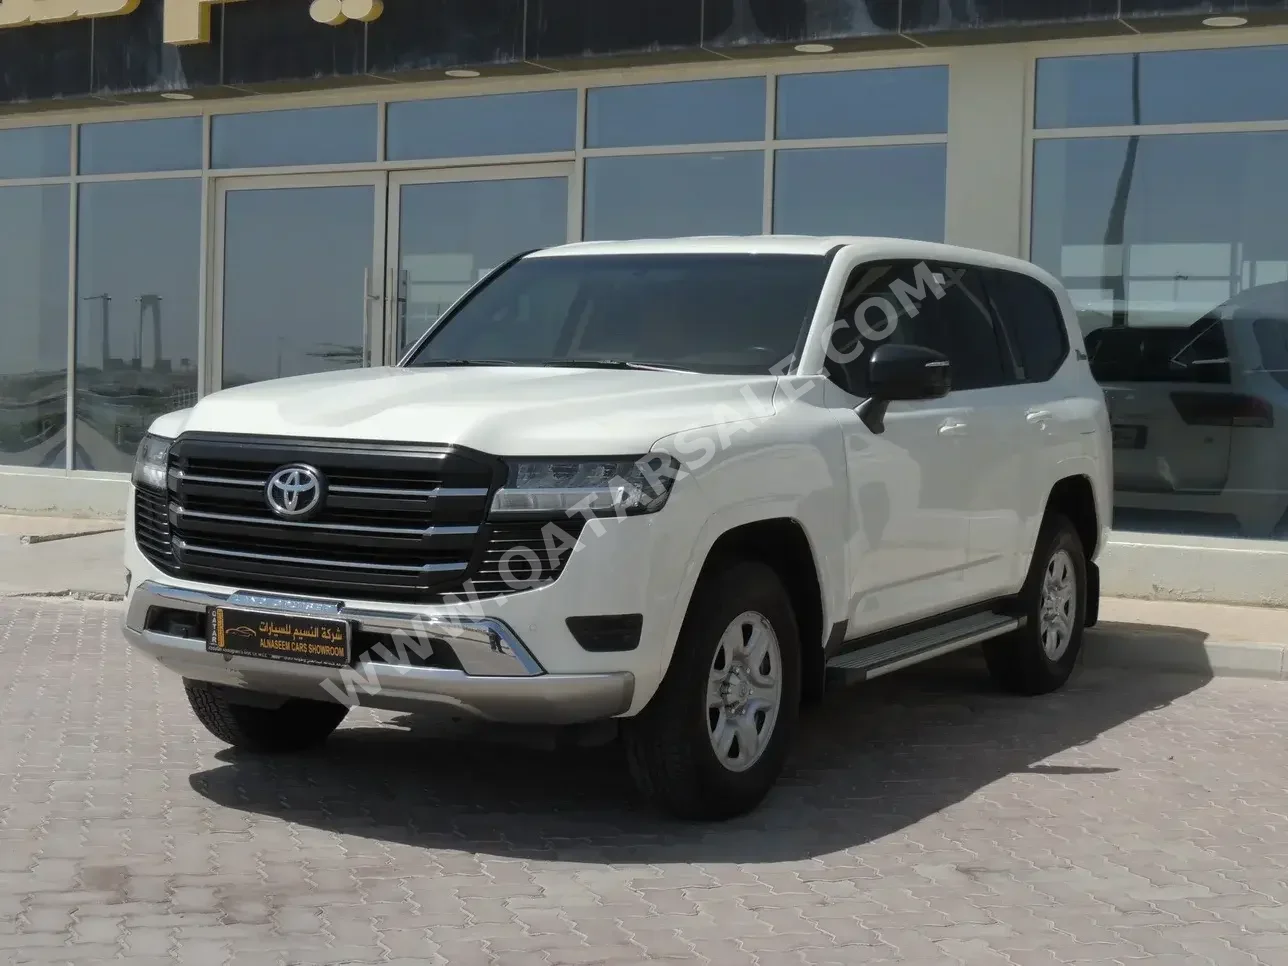 Toyota  Land Cruiser  GX  2022  Automatic  37,000 Km  6 Cylinder  Four Wheel Drive (4WD)  SUV  White  With Warranty